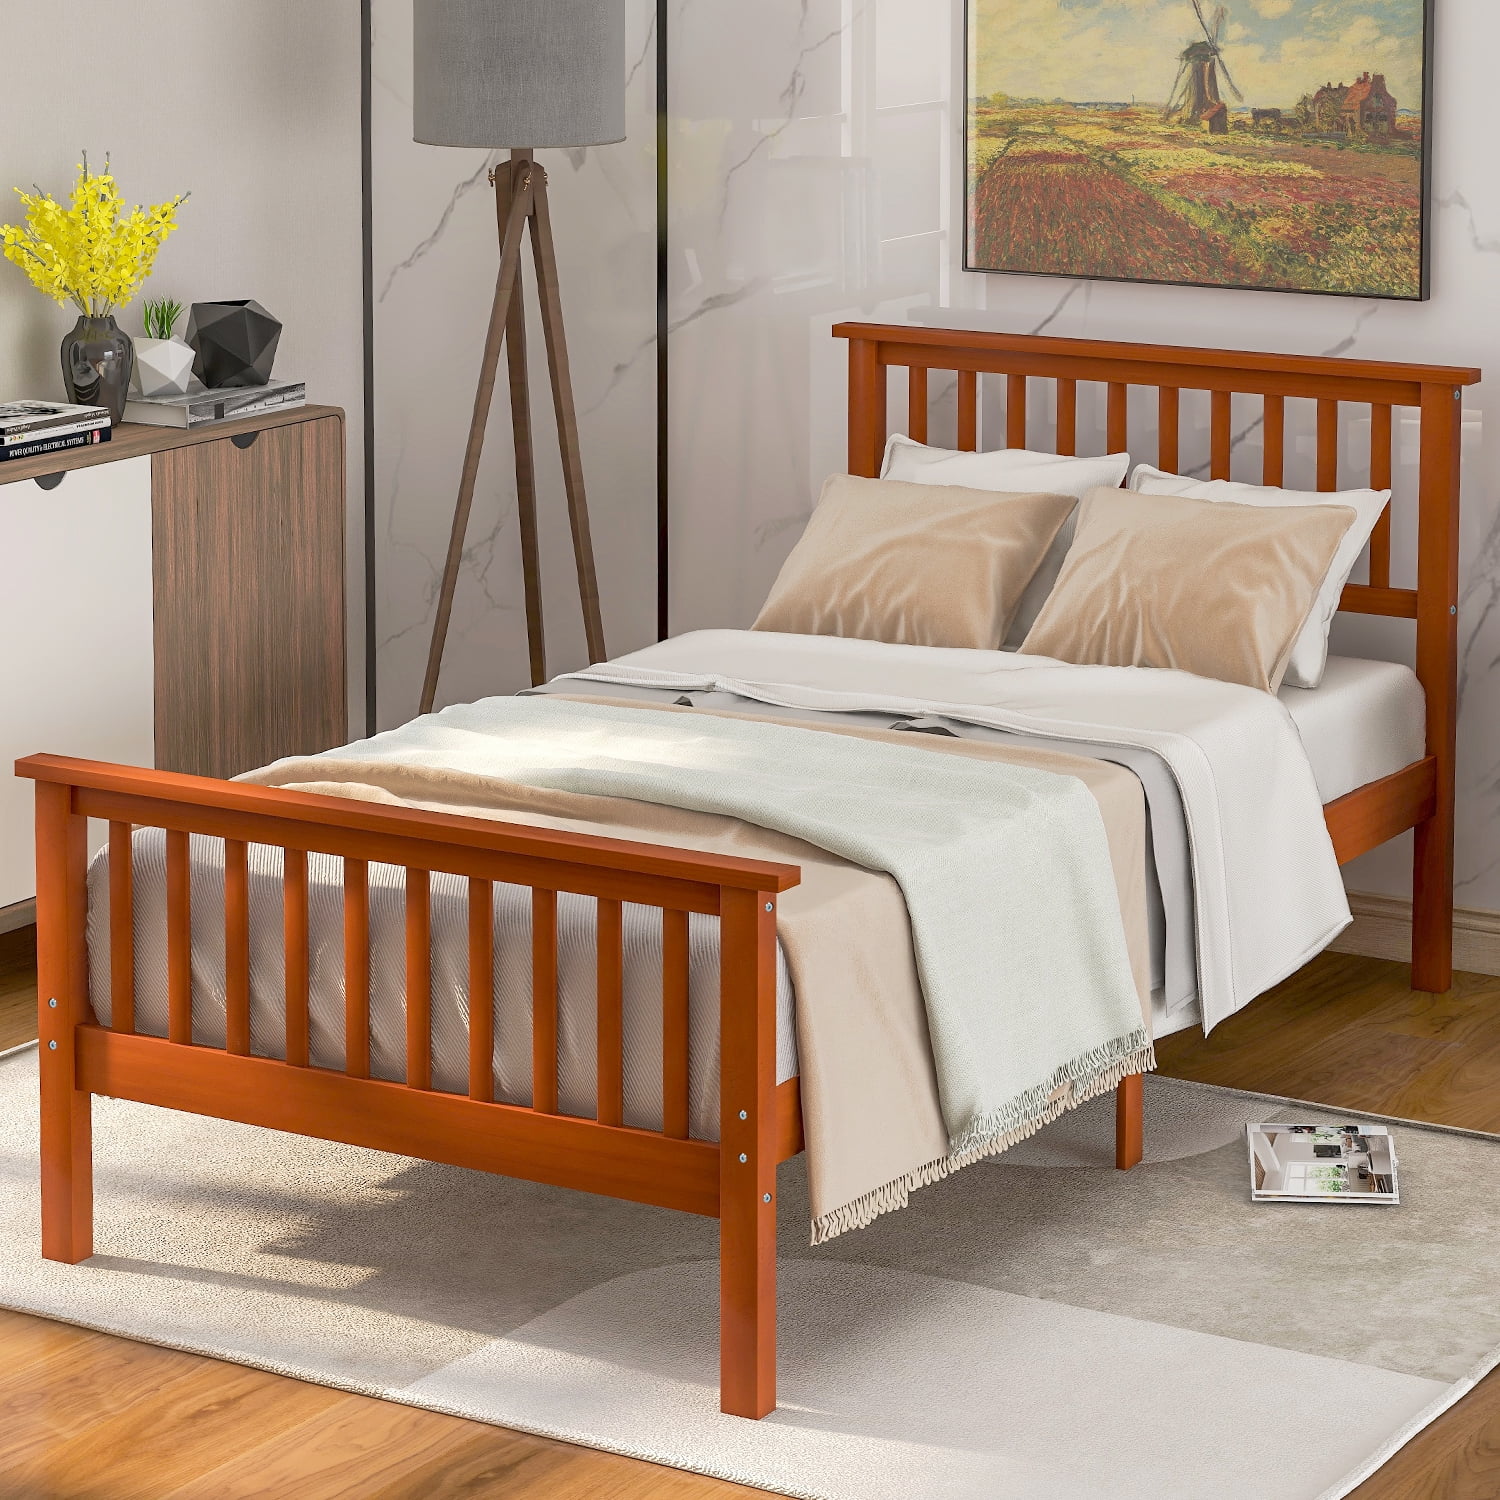 Syngar Twin Bed Frame With Headboard, Twin Pine Bed Frame